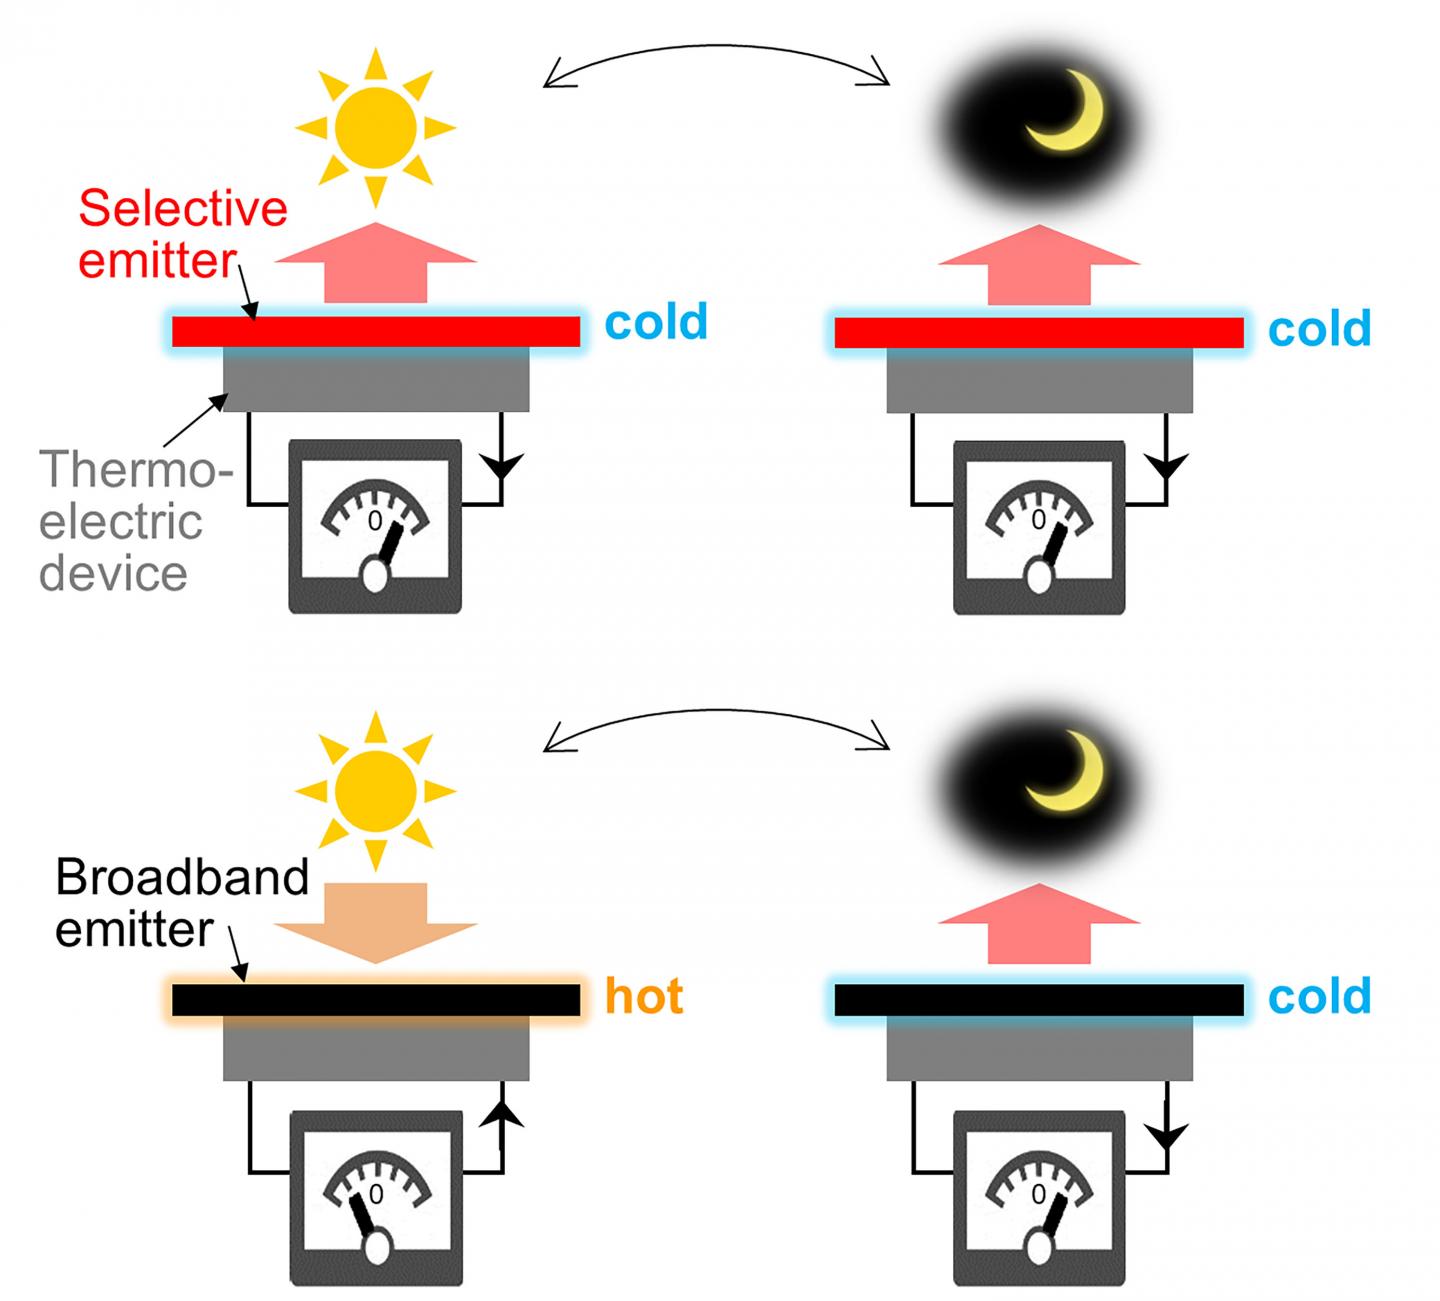 An illustration of thermoelectric devices using a wavelength-selective emitter and a broadband emitter